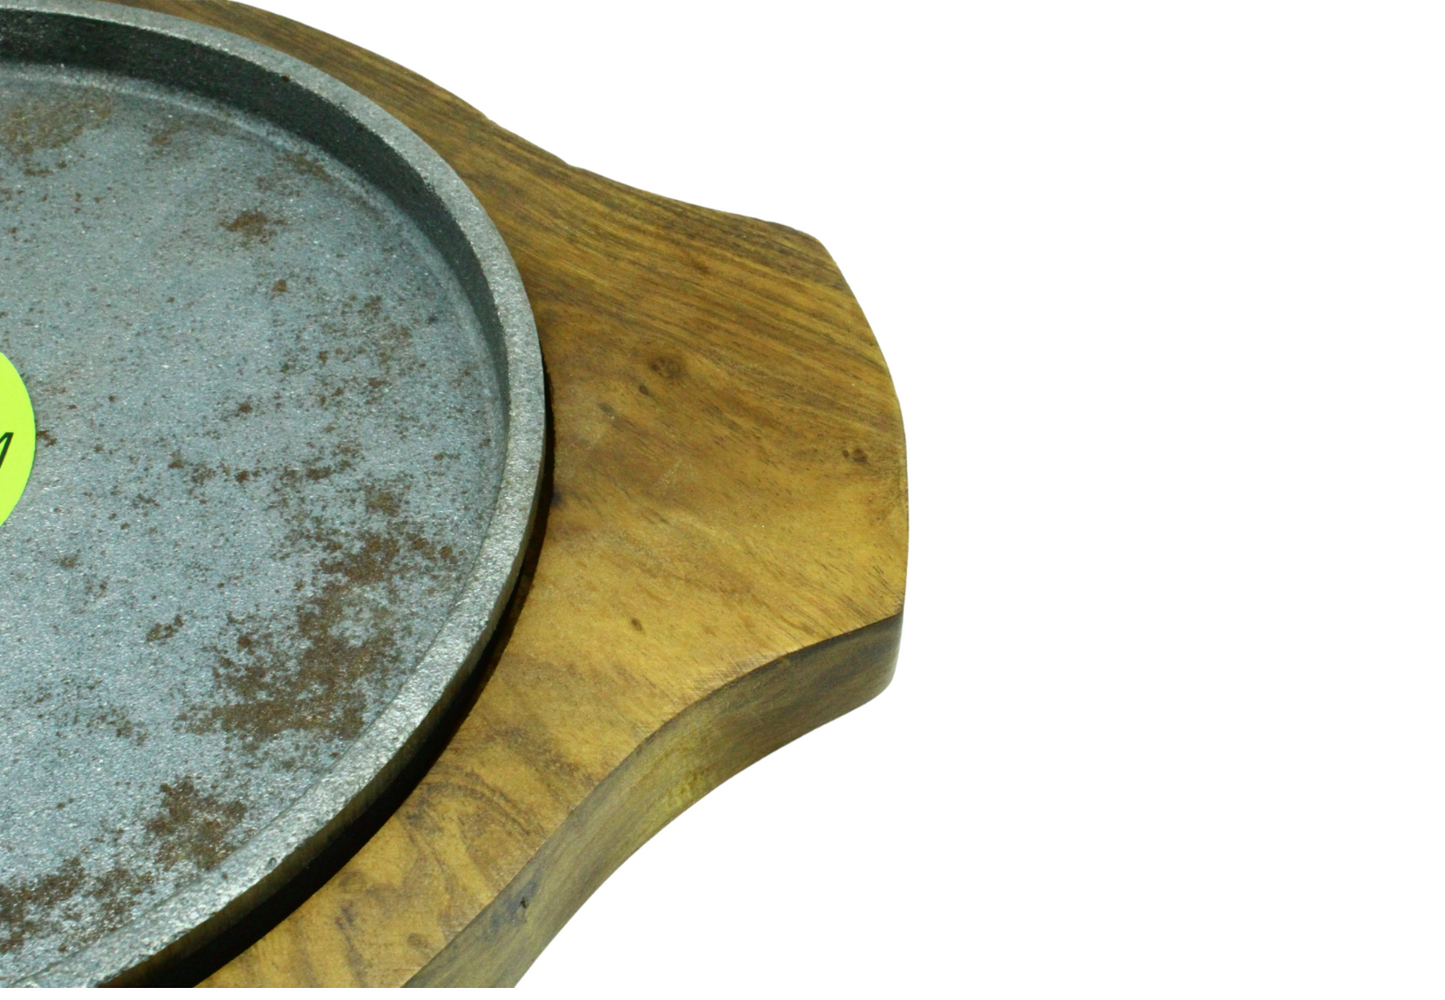 Cast Iron Sizzler Plate With Wooden Base | 7 inches | 1.25 KG TRILONIUM | Cast Iron Cookware